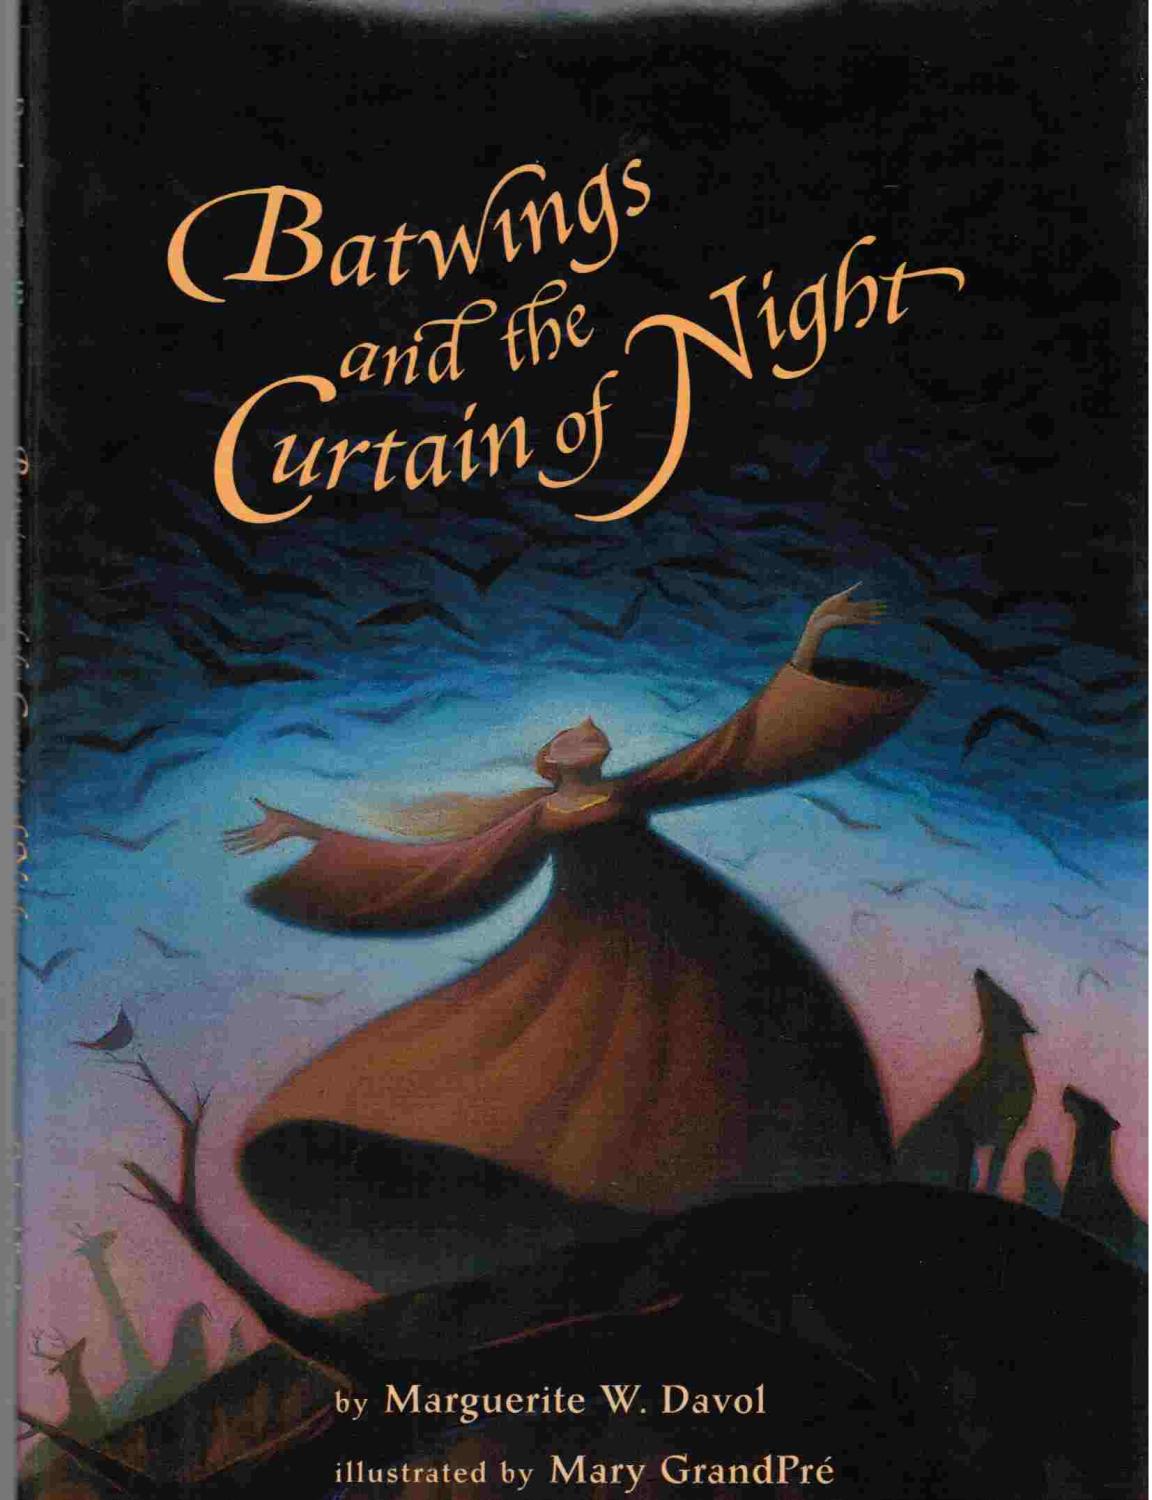 Batwings and the Curtain of Night - Davol, Marguerite W. ; Grandpre, Mary